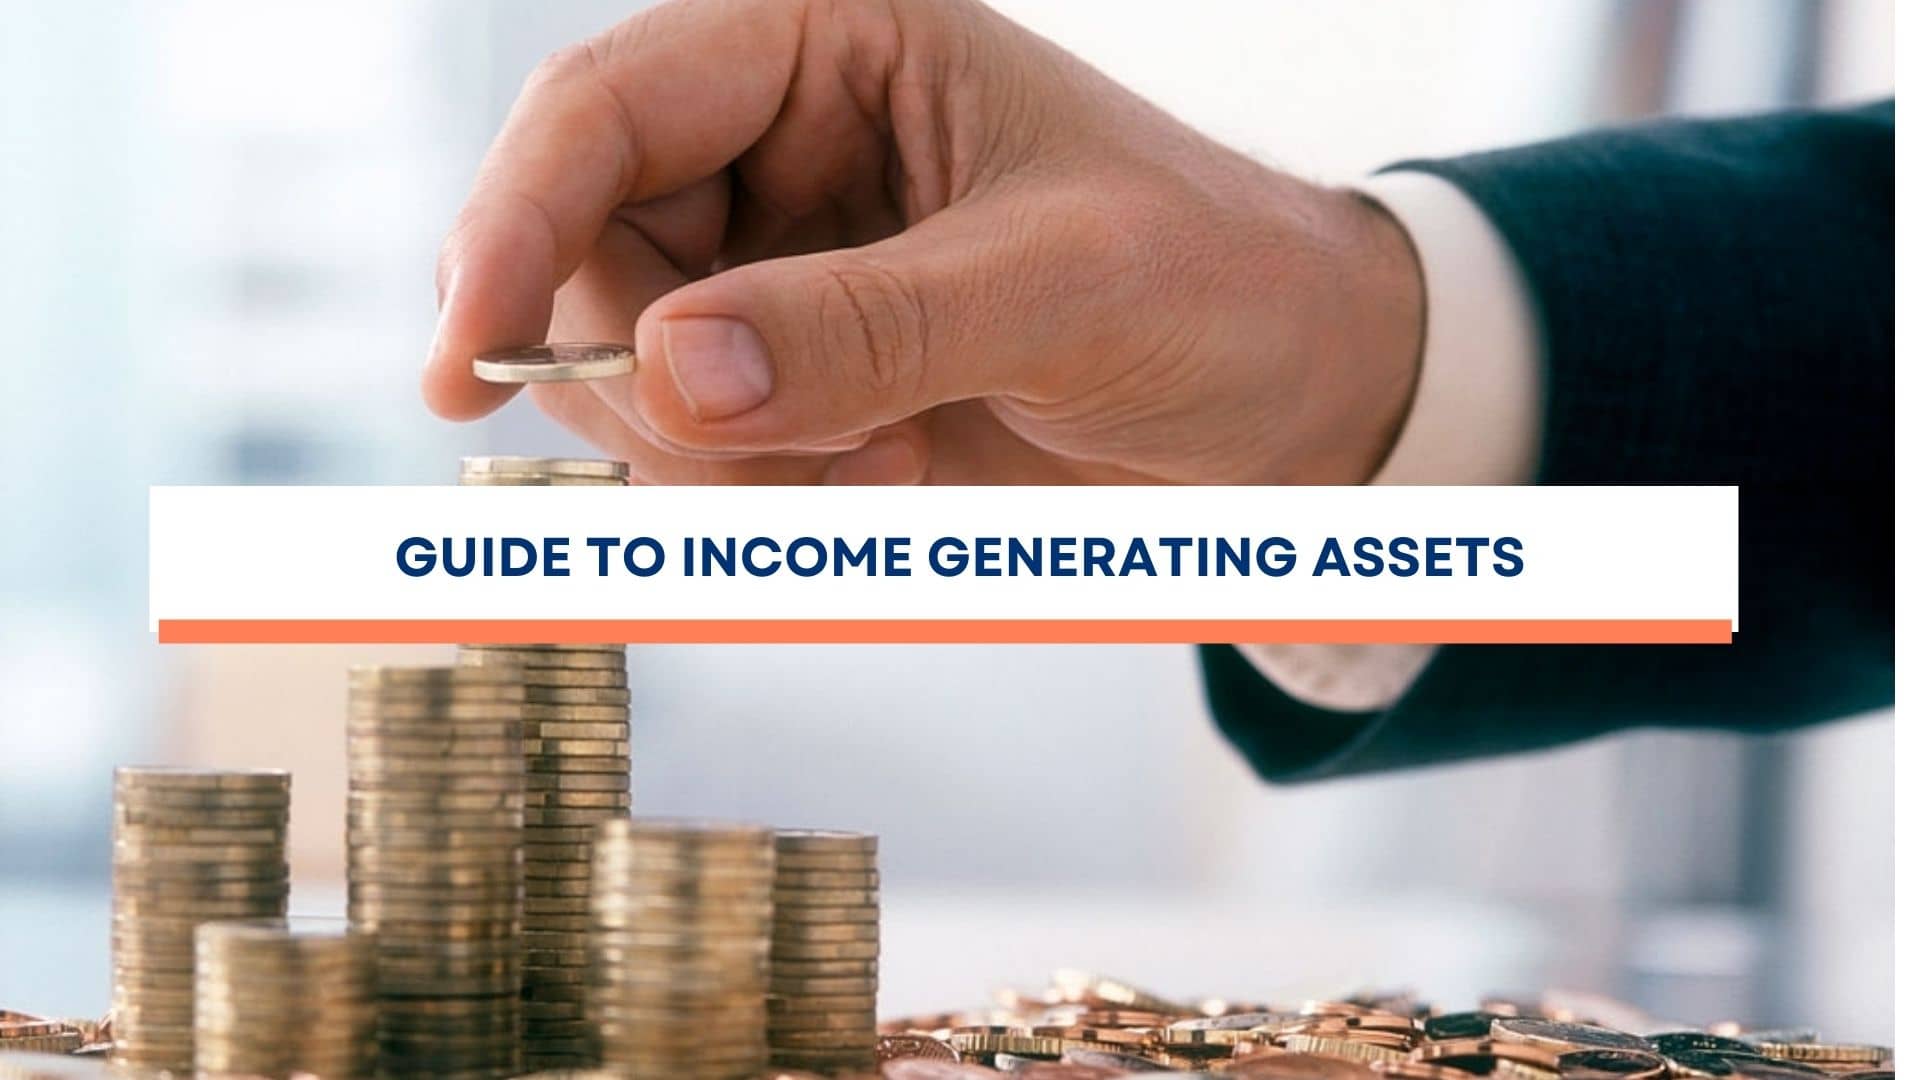 Guide To Income Generating Assets